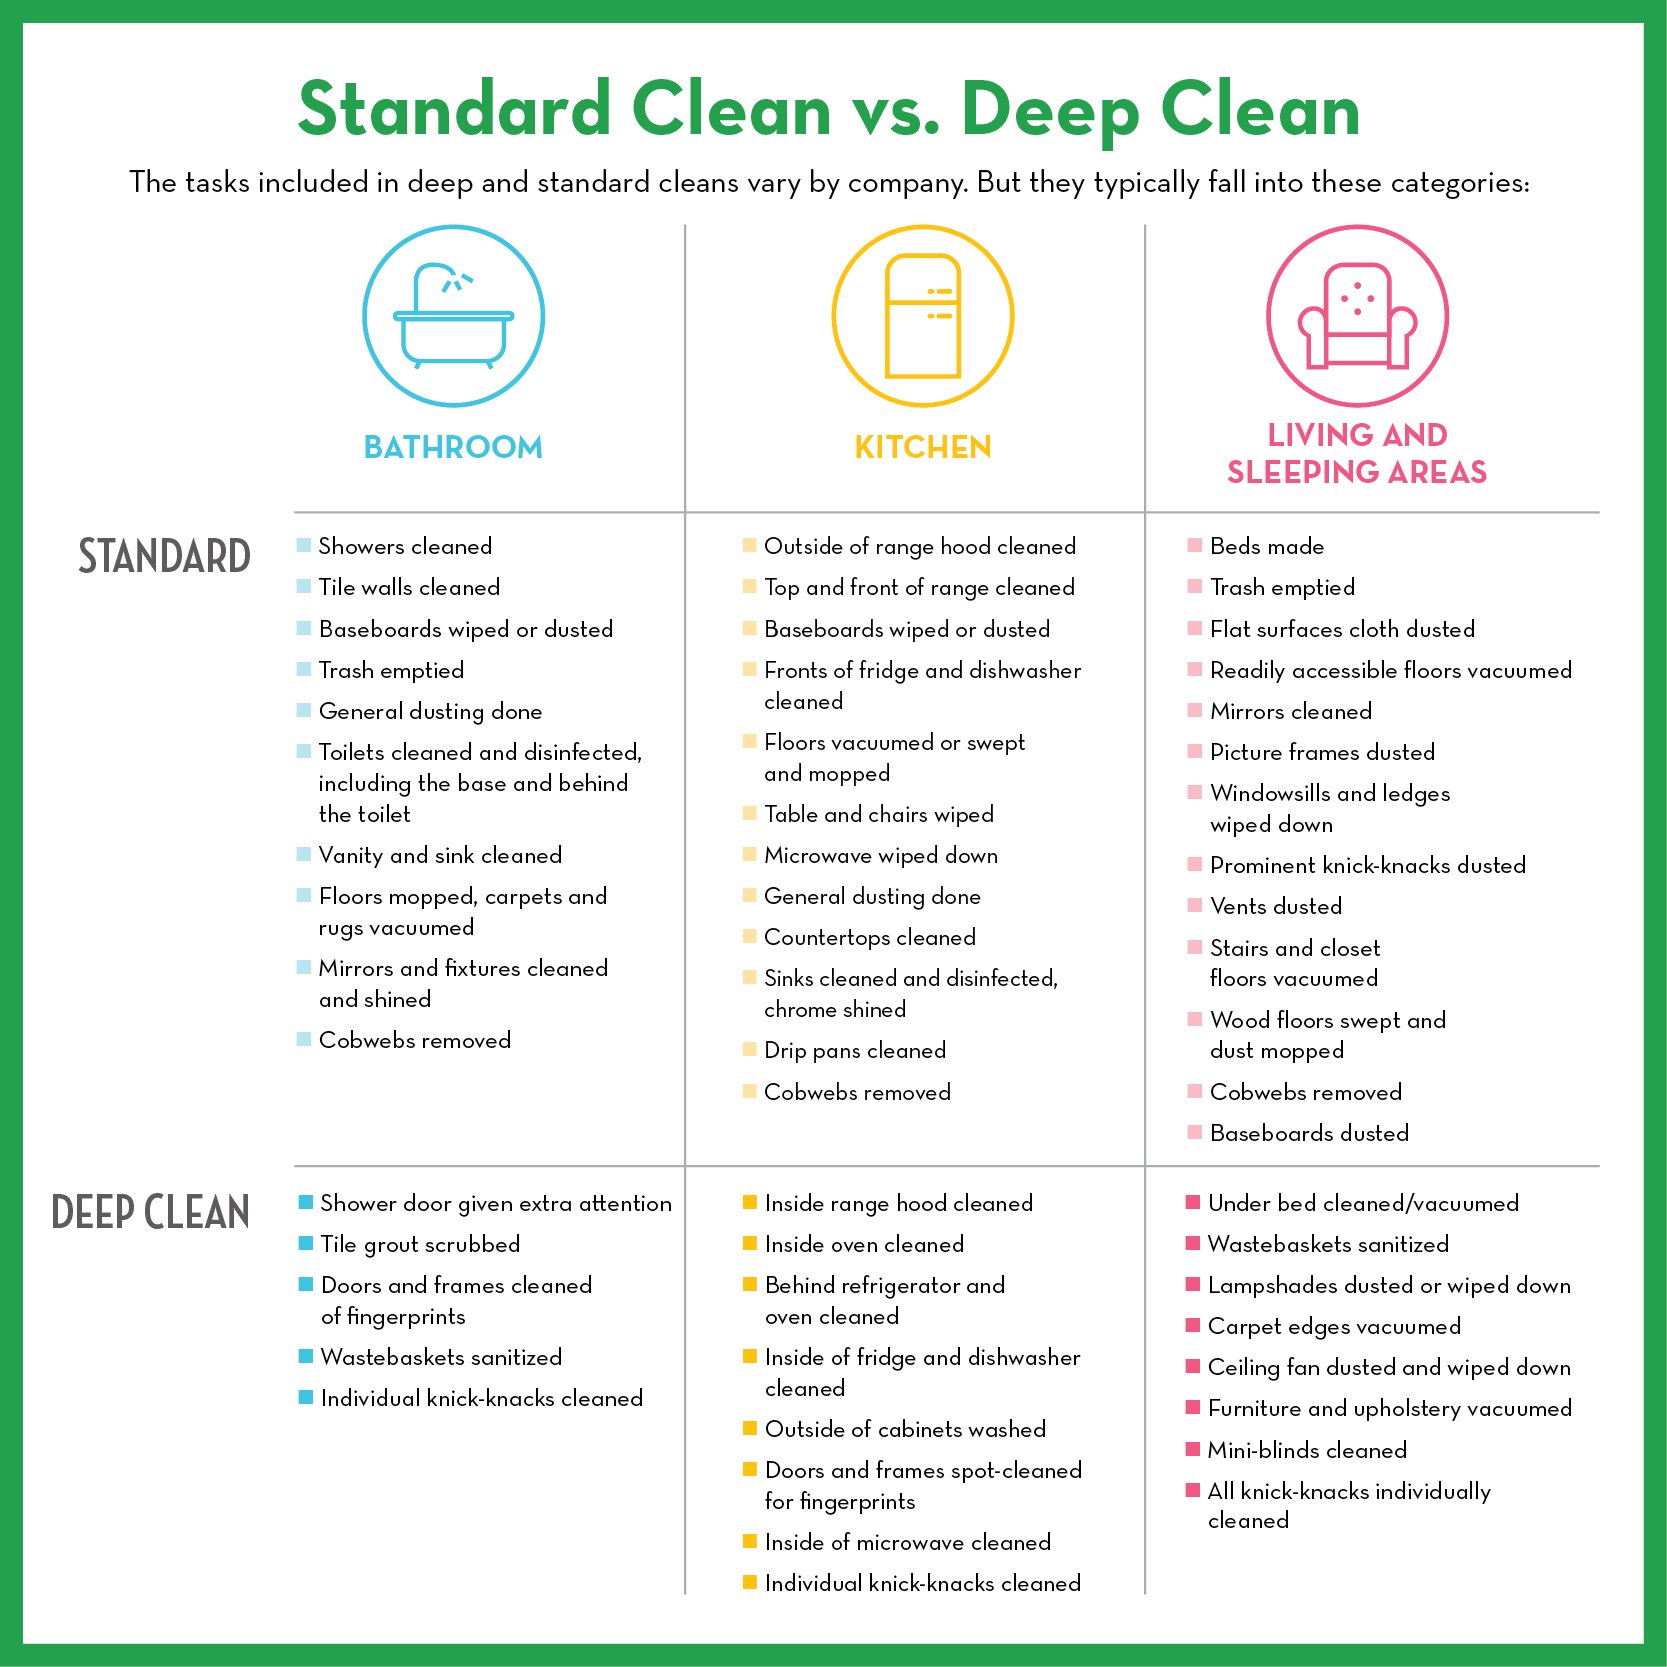 What Is Standard Cleaning Vs Deep Cleaning?